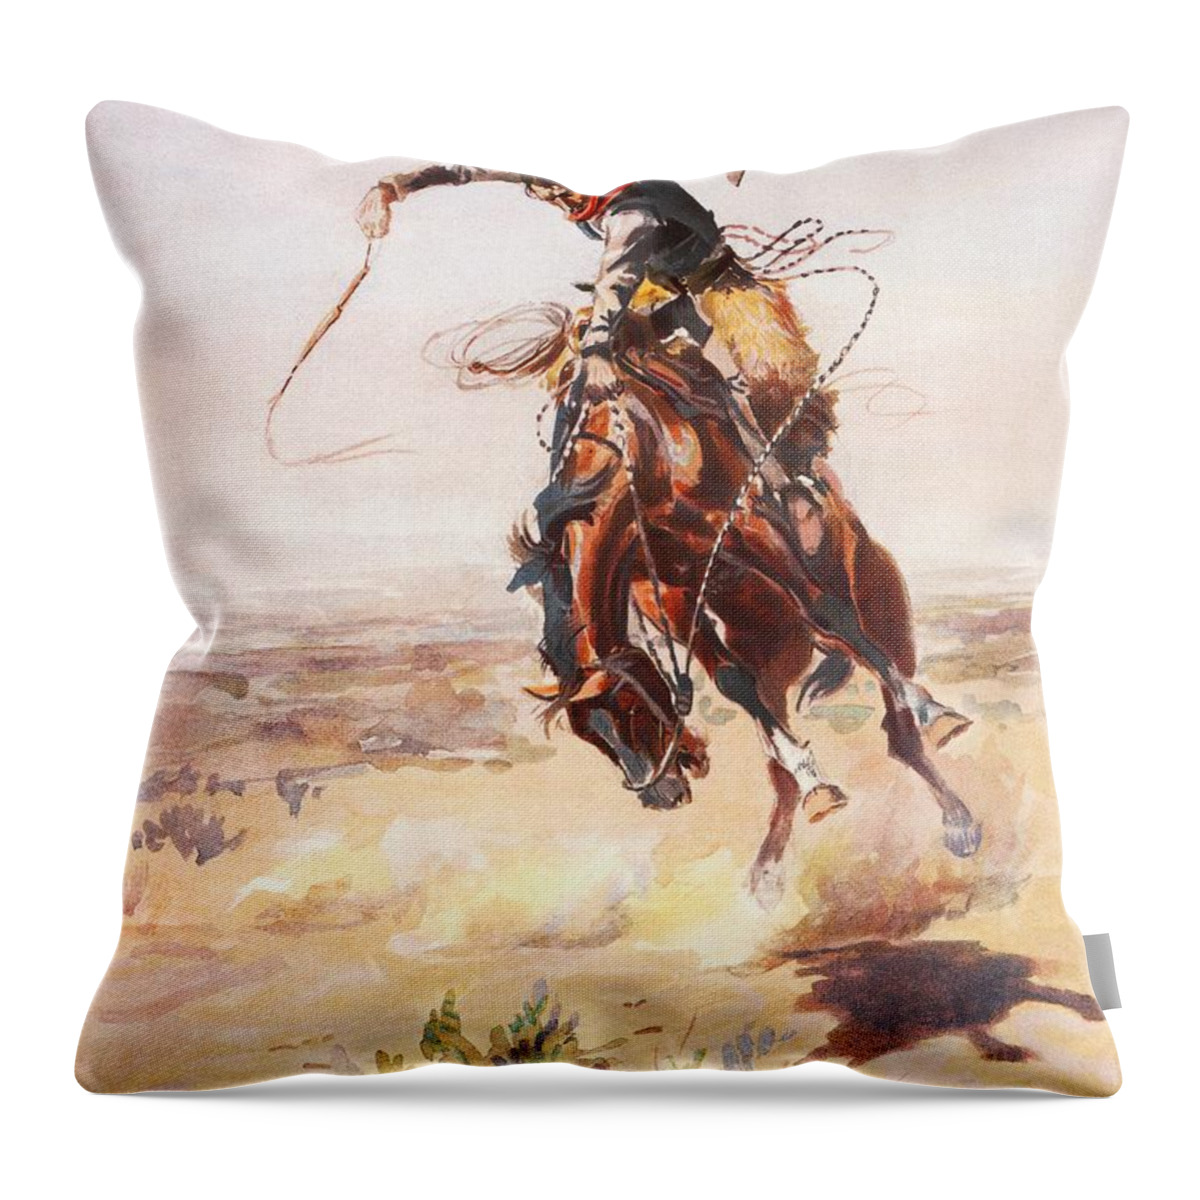 Charles Russell Throw Pillow featuring the digital art A Bad Hoss by Charles Russell